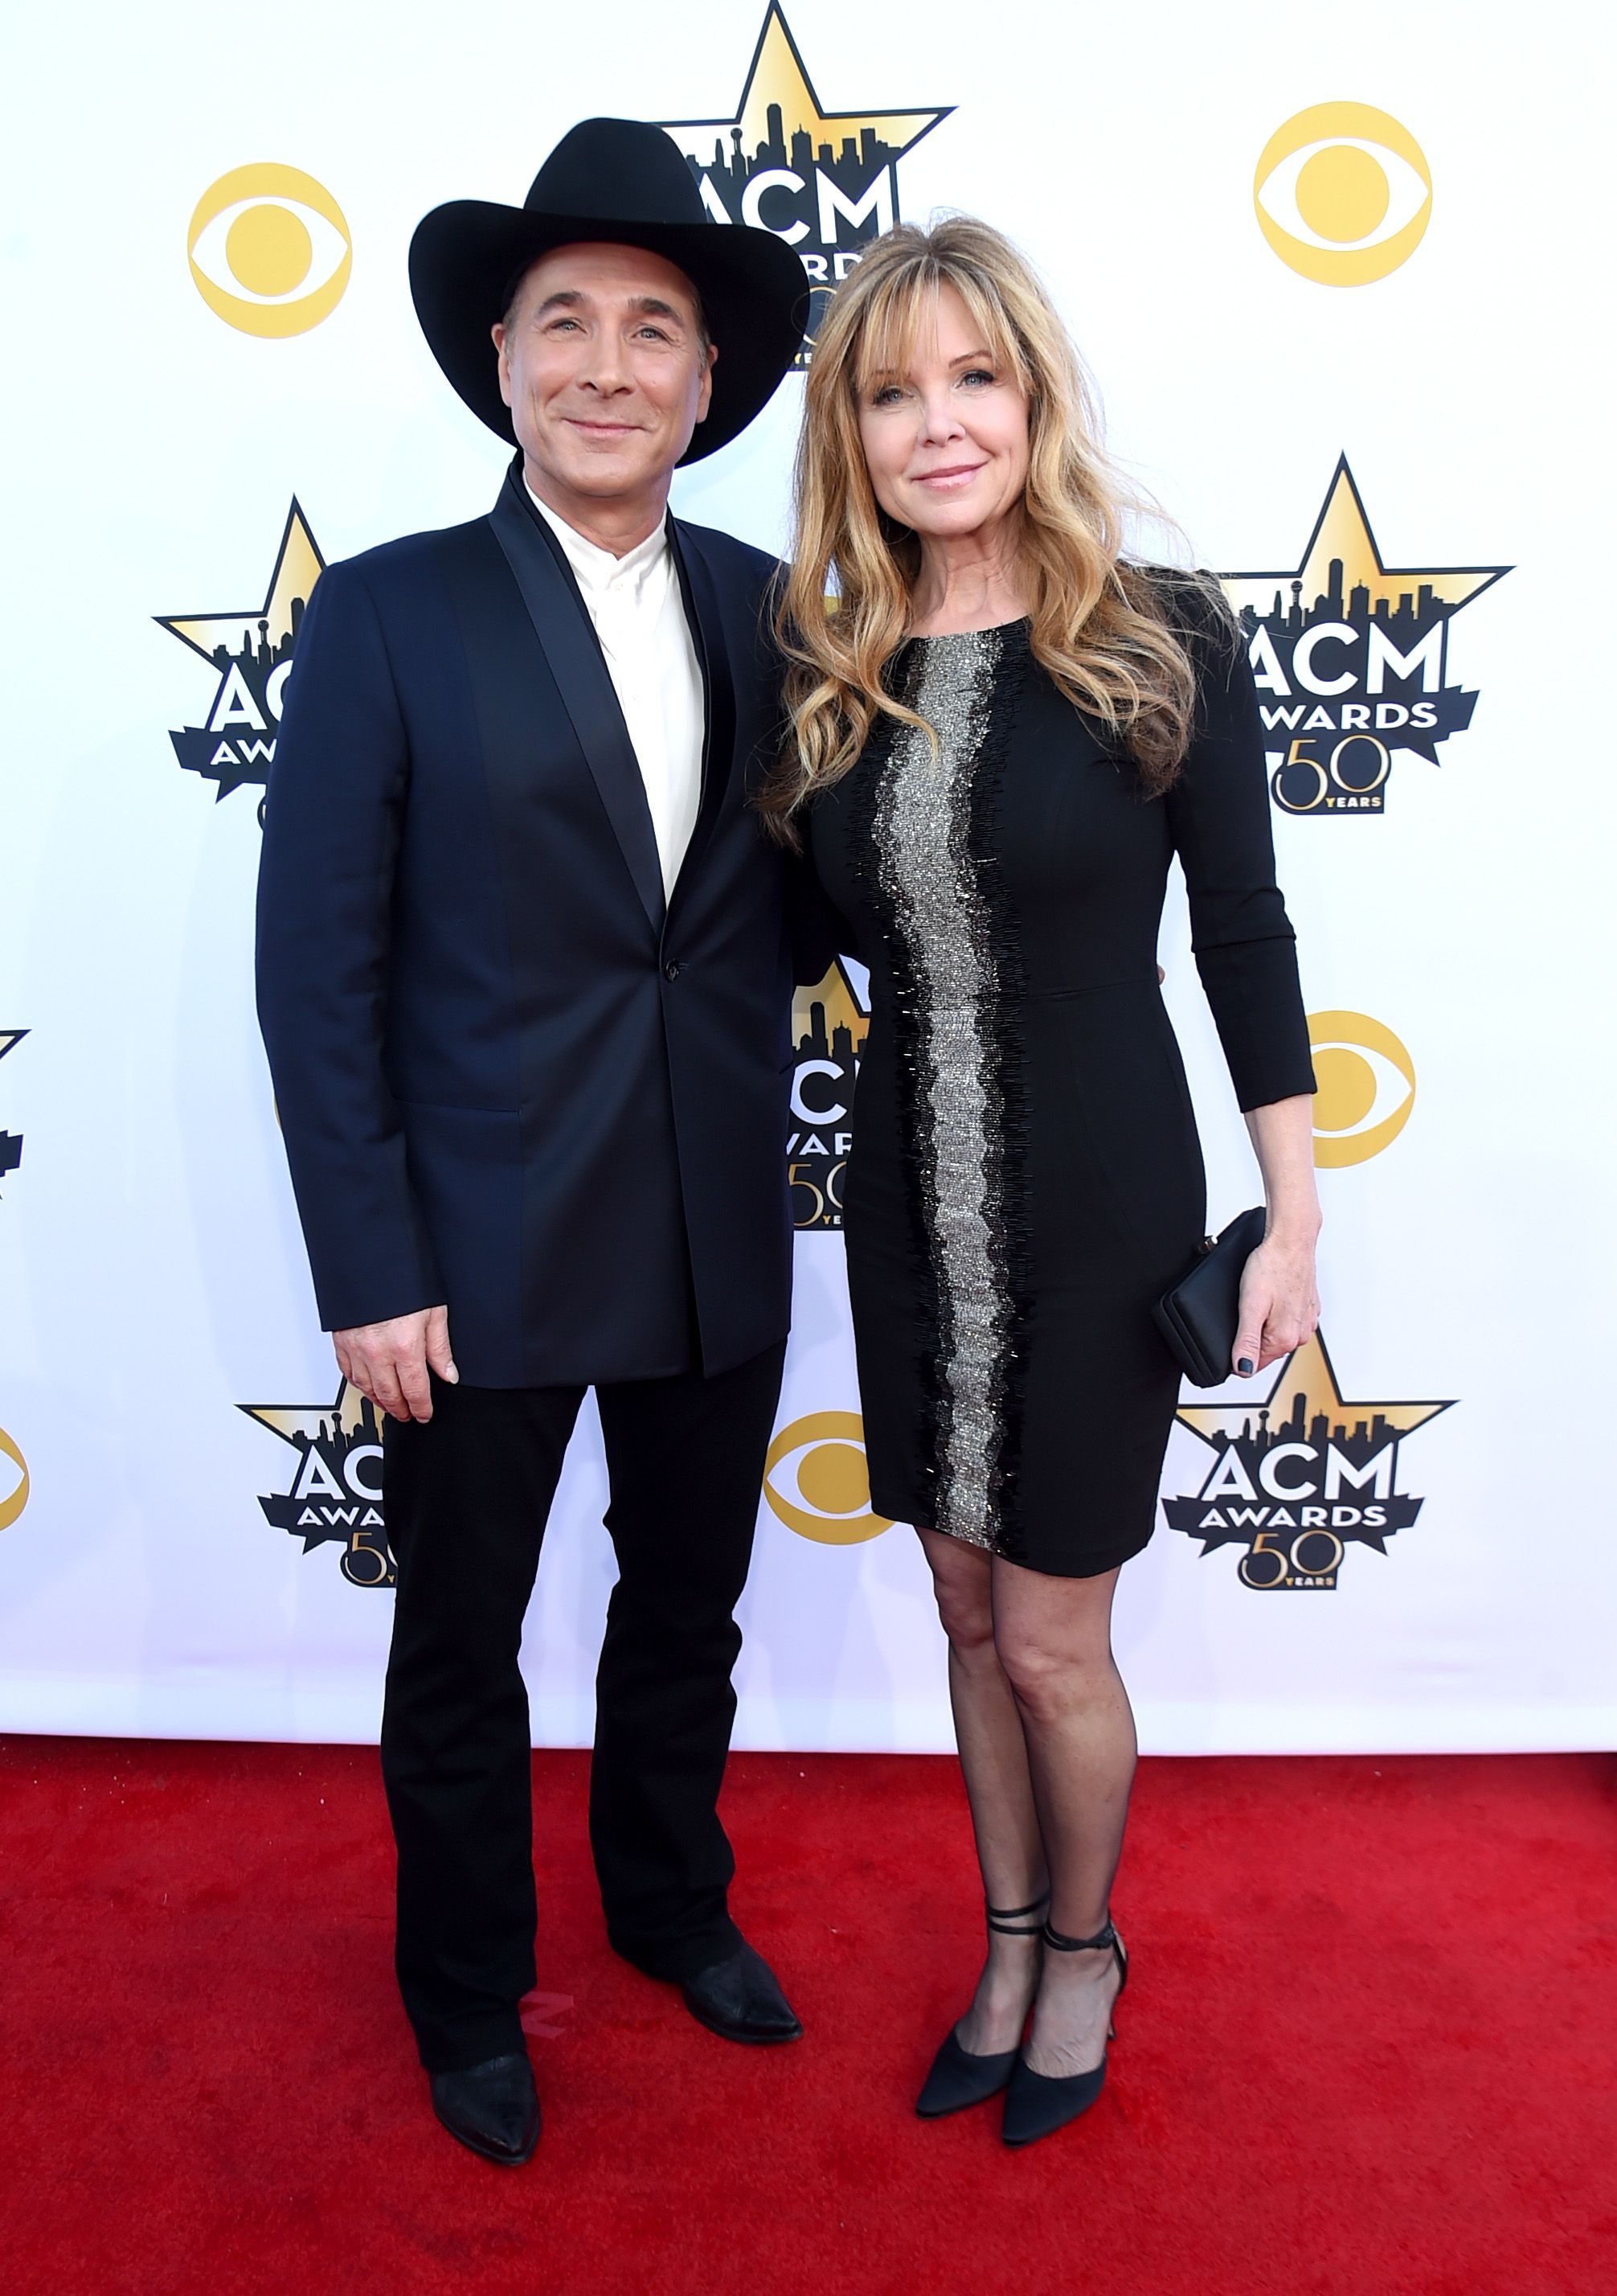 Clint Black and Lisa Hartman Black at the 50th Academy of Country Music Awards on April 19, 2015, in Arlington, Texas | Photo: Rick Diamond/ACM2015/Getty Images